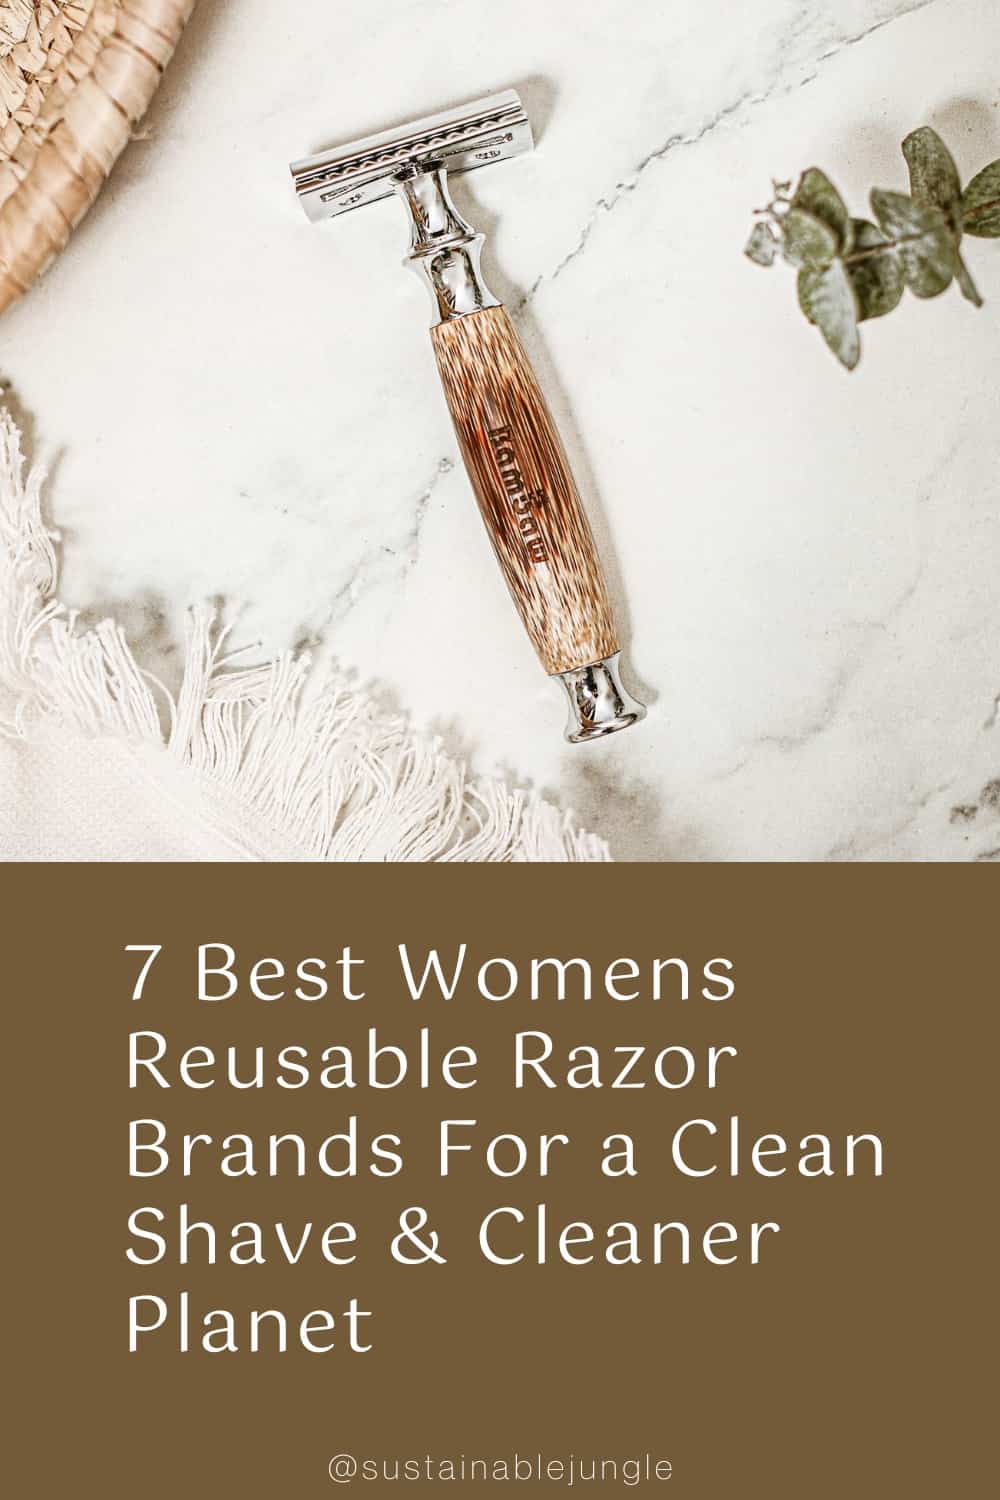 7 Best Womens Reusable Razor Brands For a Clean Shave & Cleaner Planet Image by Bambaw #womensreusablerazor #bestreusablerazorwomens #bestwomensreusablerazor #bestreusablerazorsforwomen #bestplasticfreerazorsforwomen #sustainablejungle